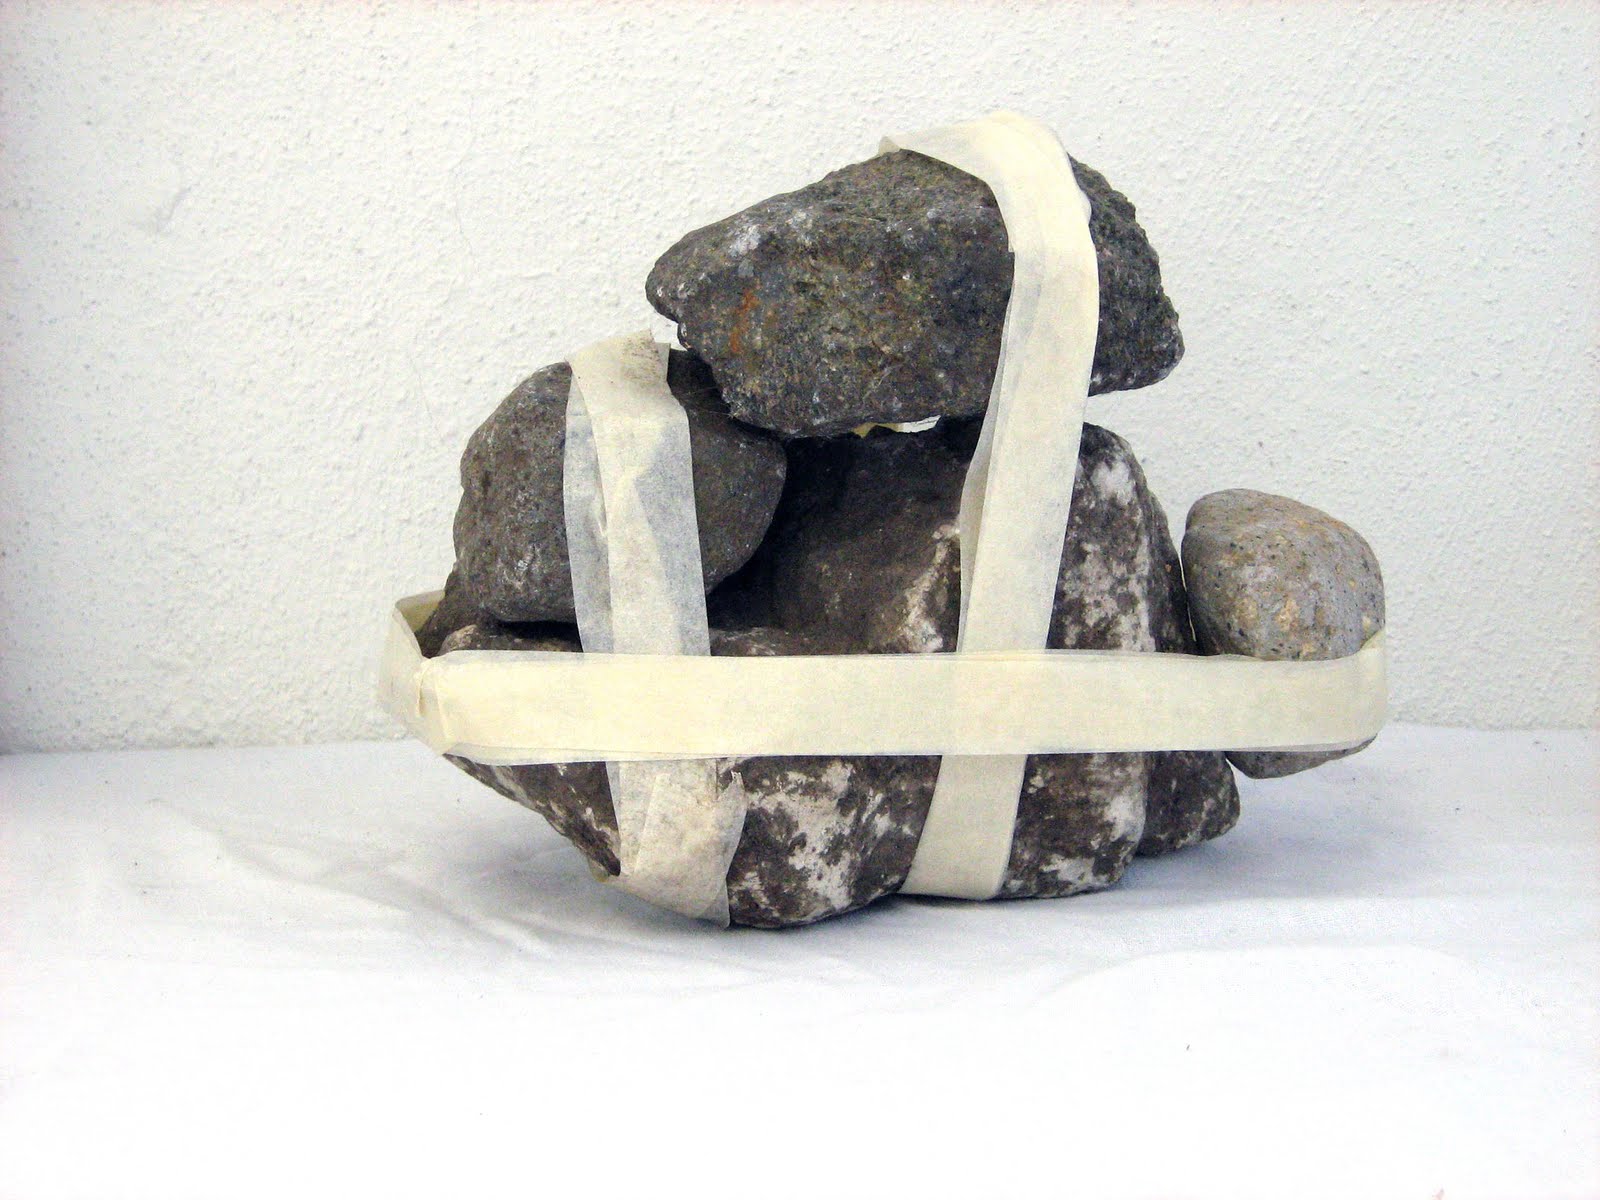 Stones tied with masking tape (IV)